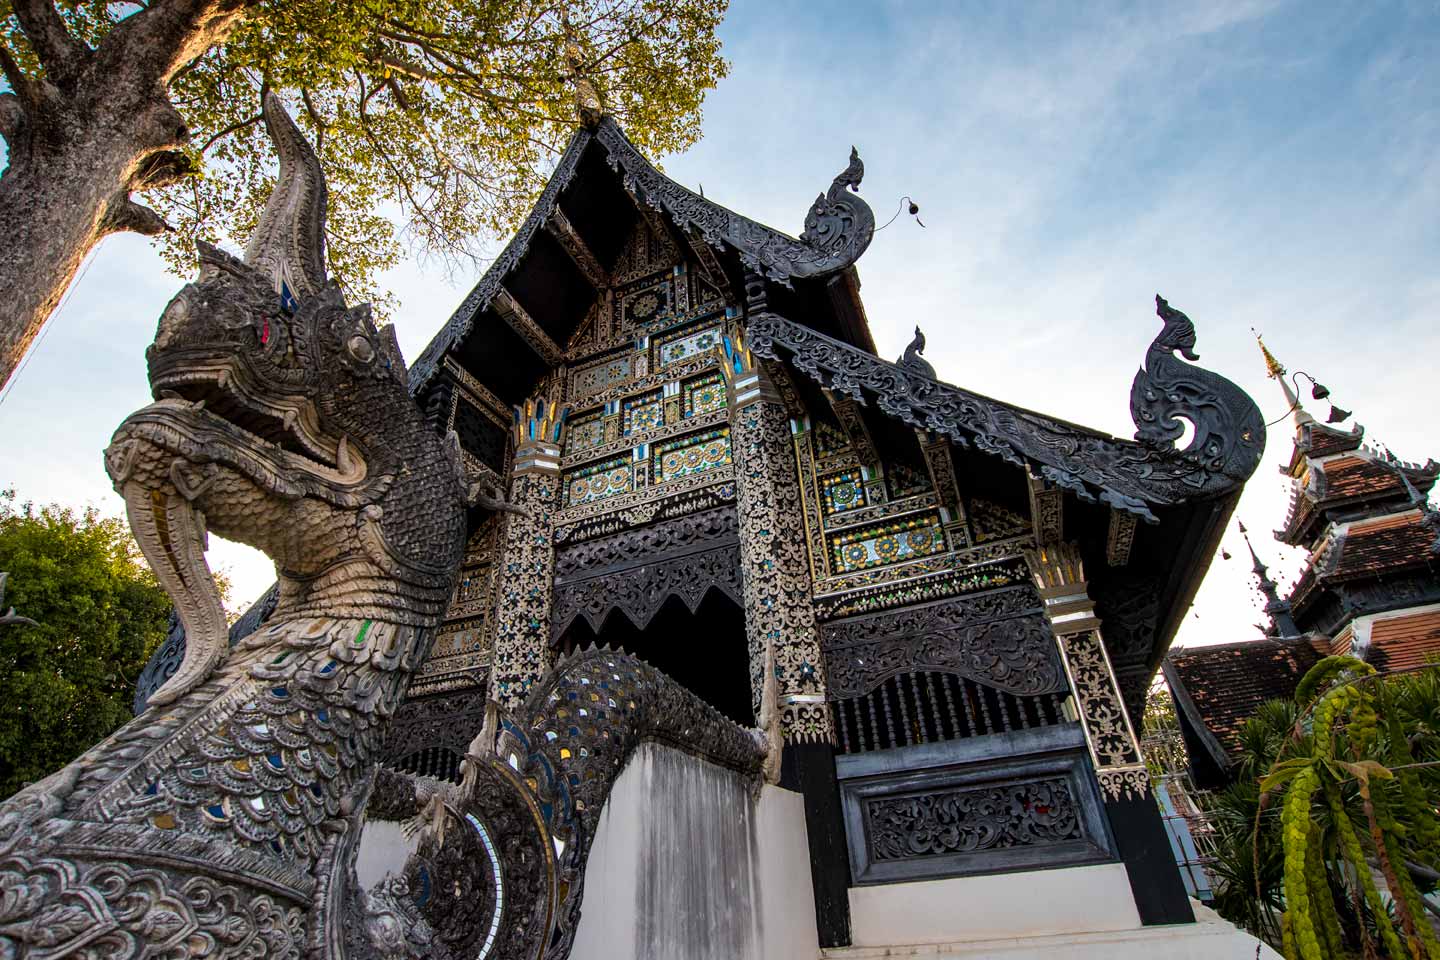 ancient Chiang Mai temple with a dragon in front